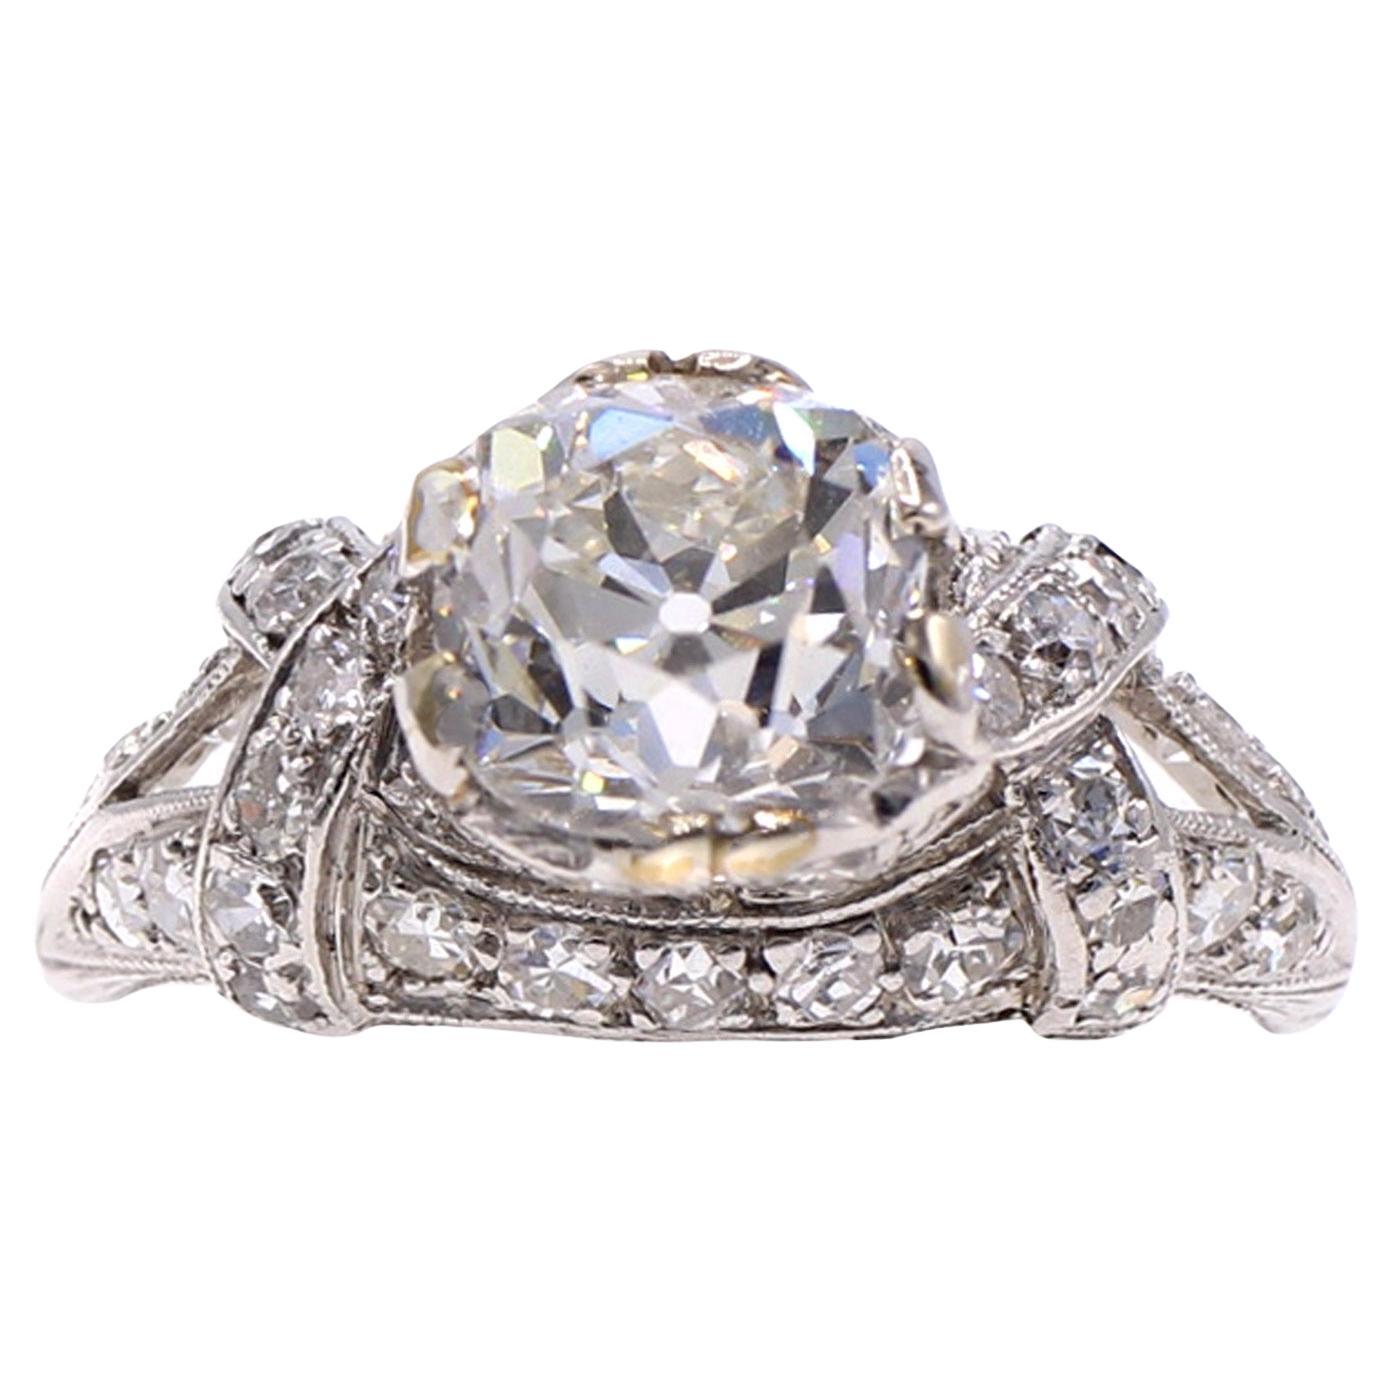 Beautifully designed and masterfully handcrafted Art Deco diamond platinum engagement ring from ca 1925. The center diamond is a beautifully cut Old Mine Brilliant cut diamond with incredible fire and life. The diamond weighs 2.01 carats and is